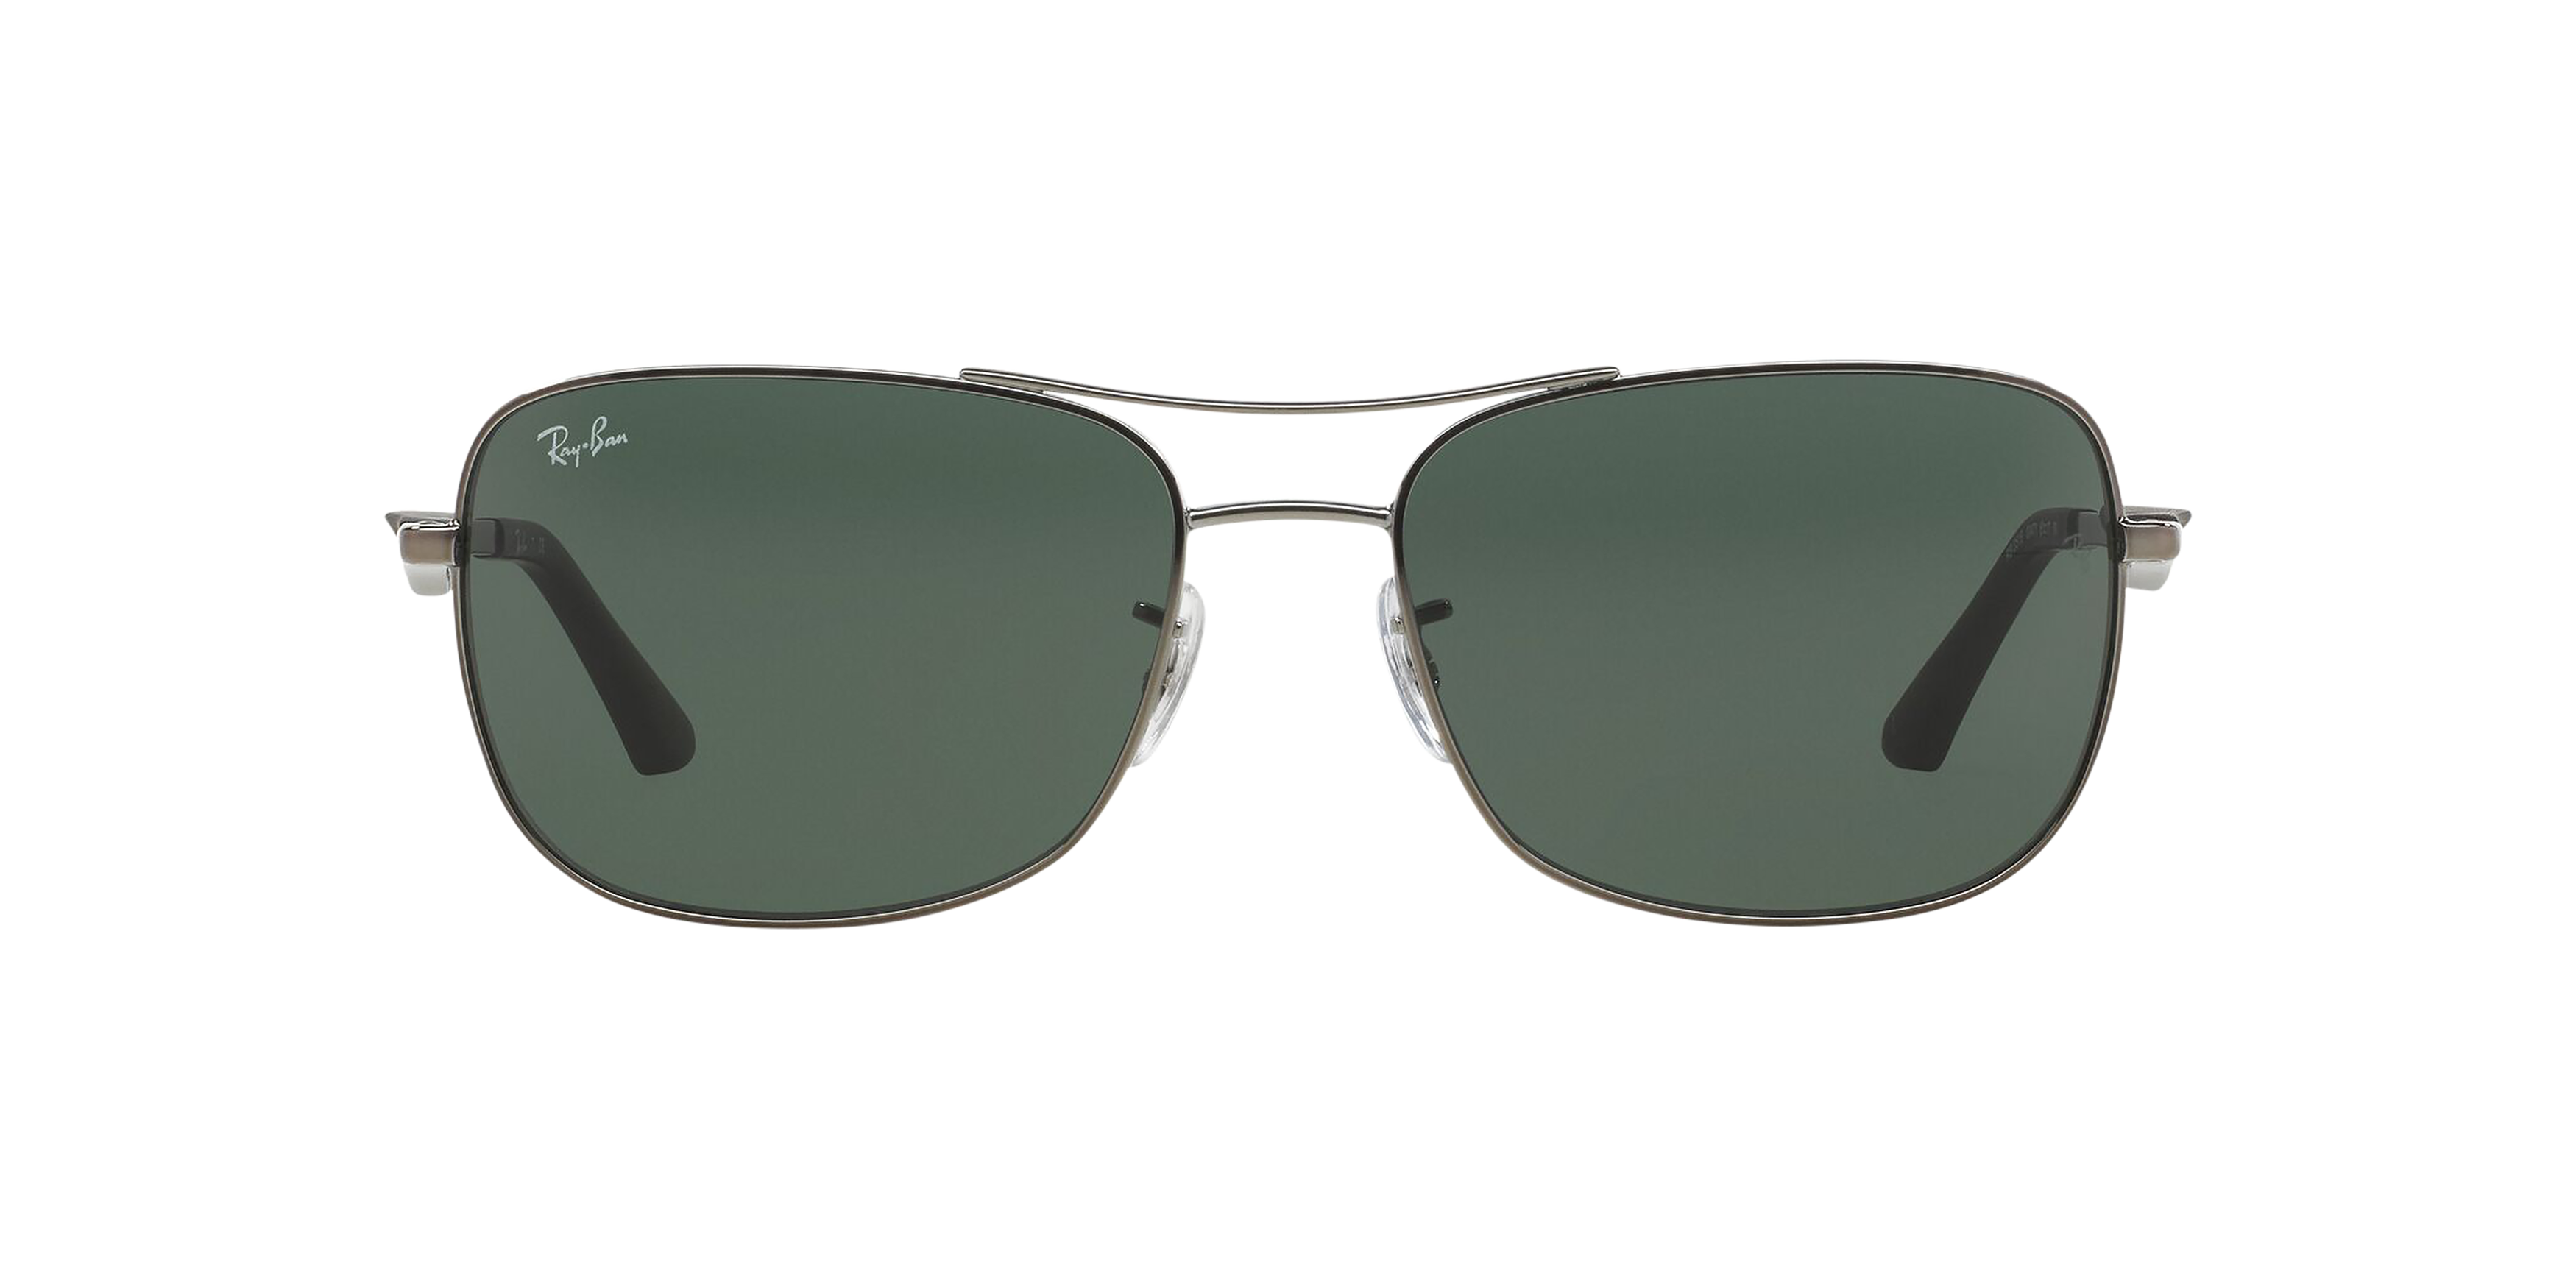 [products.image.front] Ray-Ban RB3515 004/71